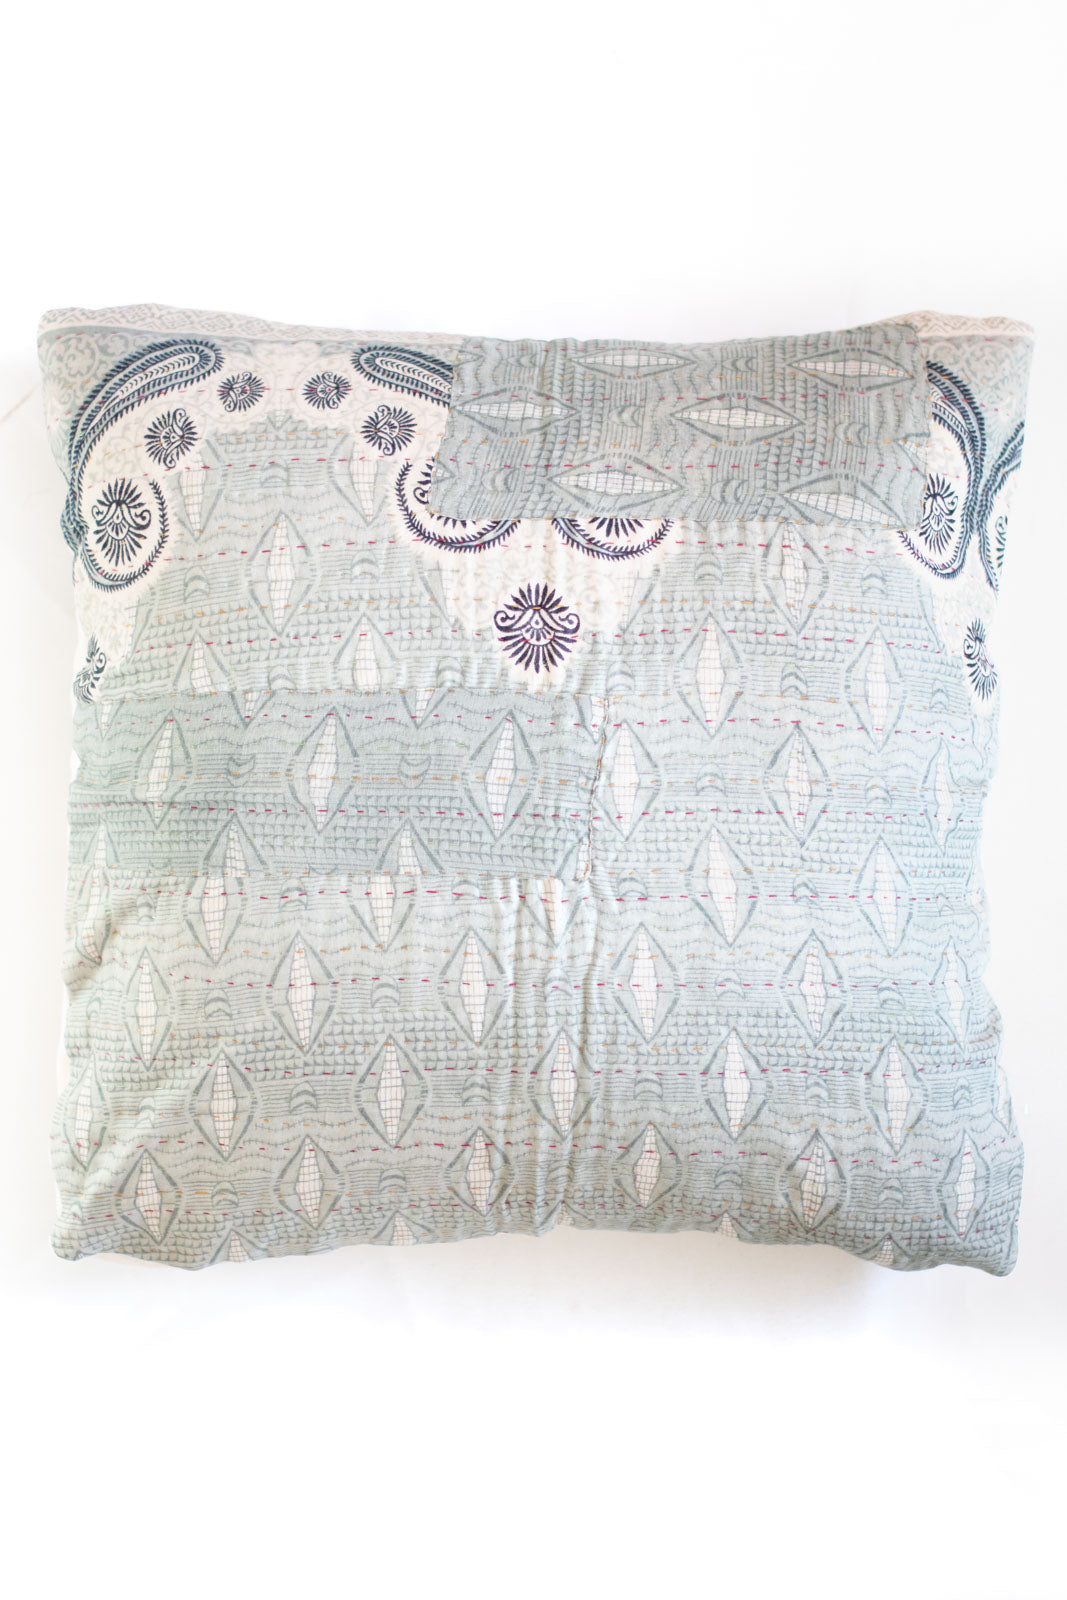 Worth no. 3 Kantha Pillow Cover